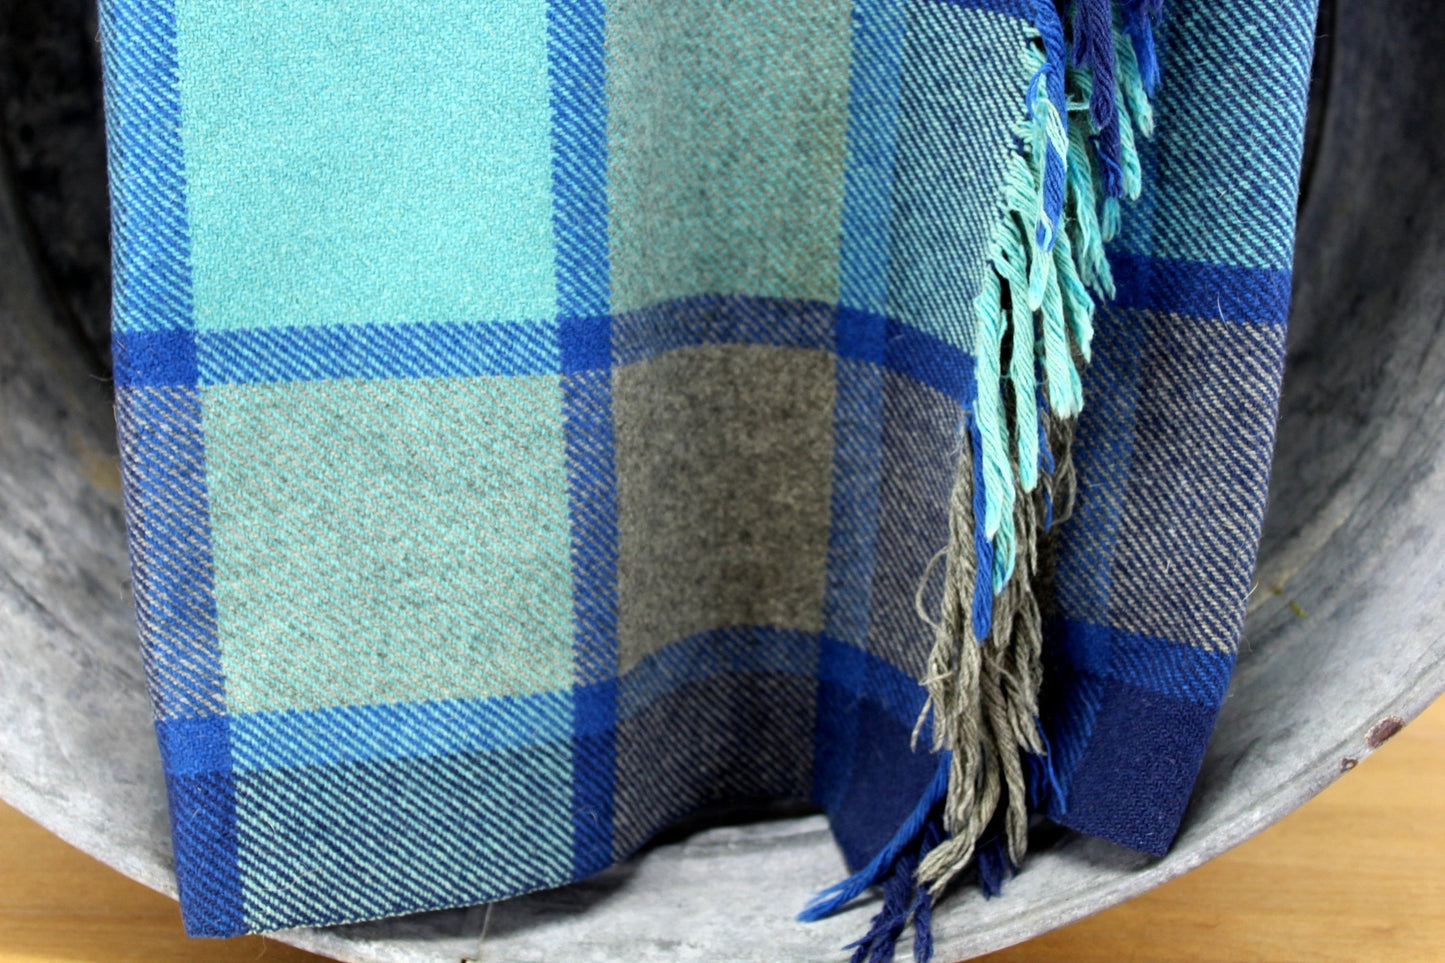 Unbranded Throw Blanket - Wool Blend Blue Aquamarine Plaid ~ Large 53" X 58" lovely color combination